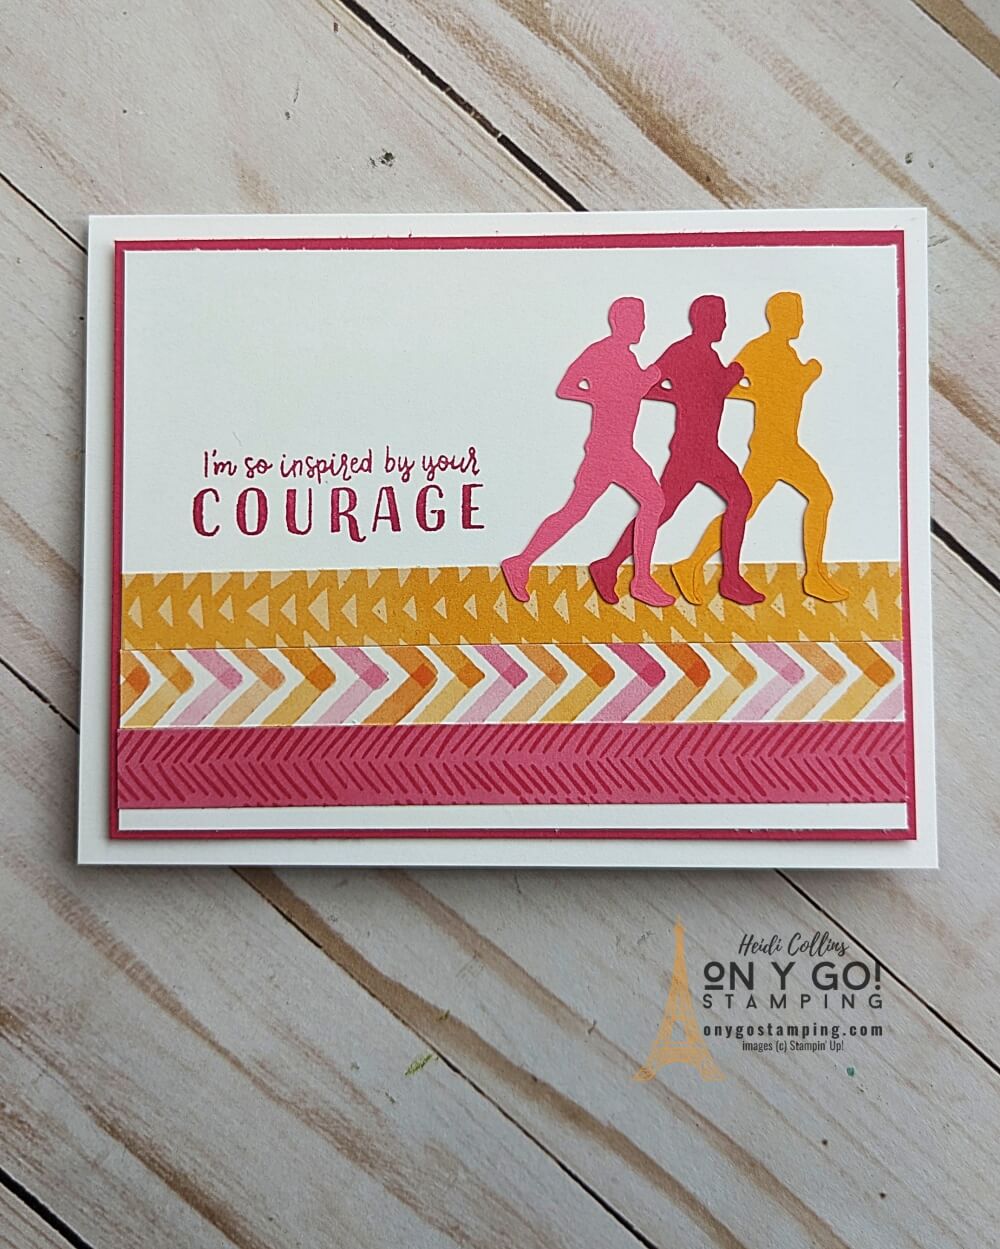 If you're looking to craft the perfect handmade card to commemorate an important milestone, then the 'Enjoy the Journey' suite from Stampin' Up! is for you! Featuring the 'Greatest Journey' stamp set and a variety of beautiful patterned papers, this collection is perfect for creating a card that will be treasured for years to come.